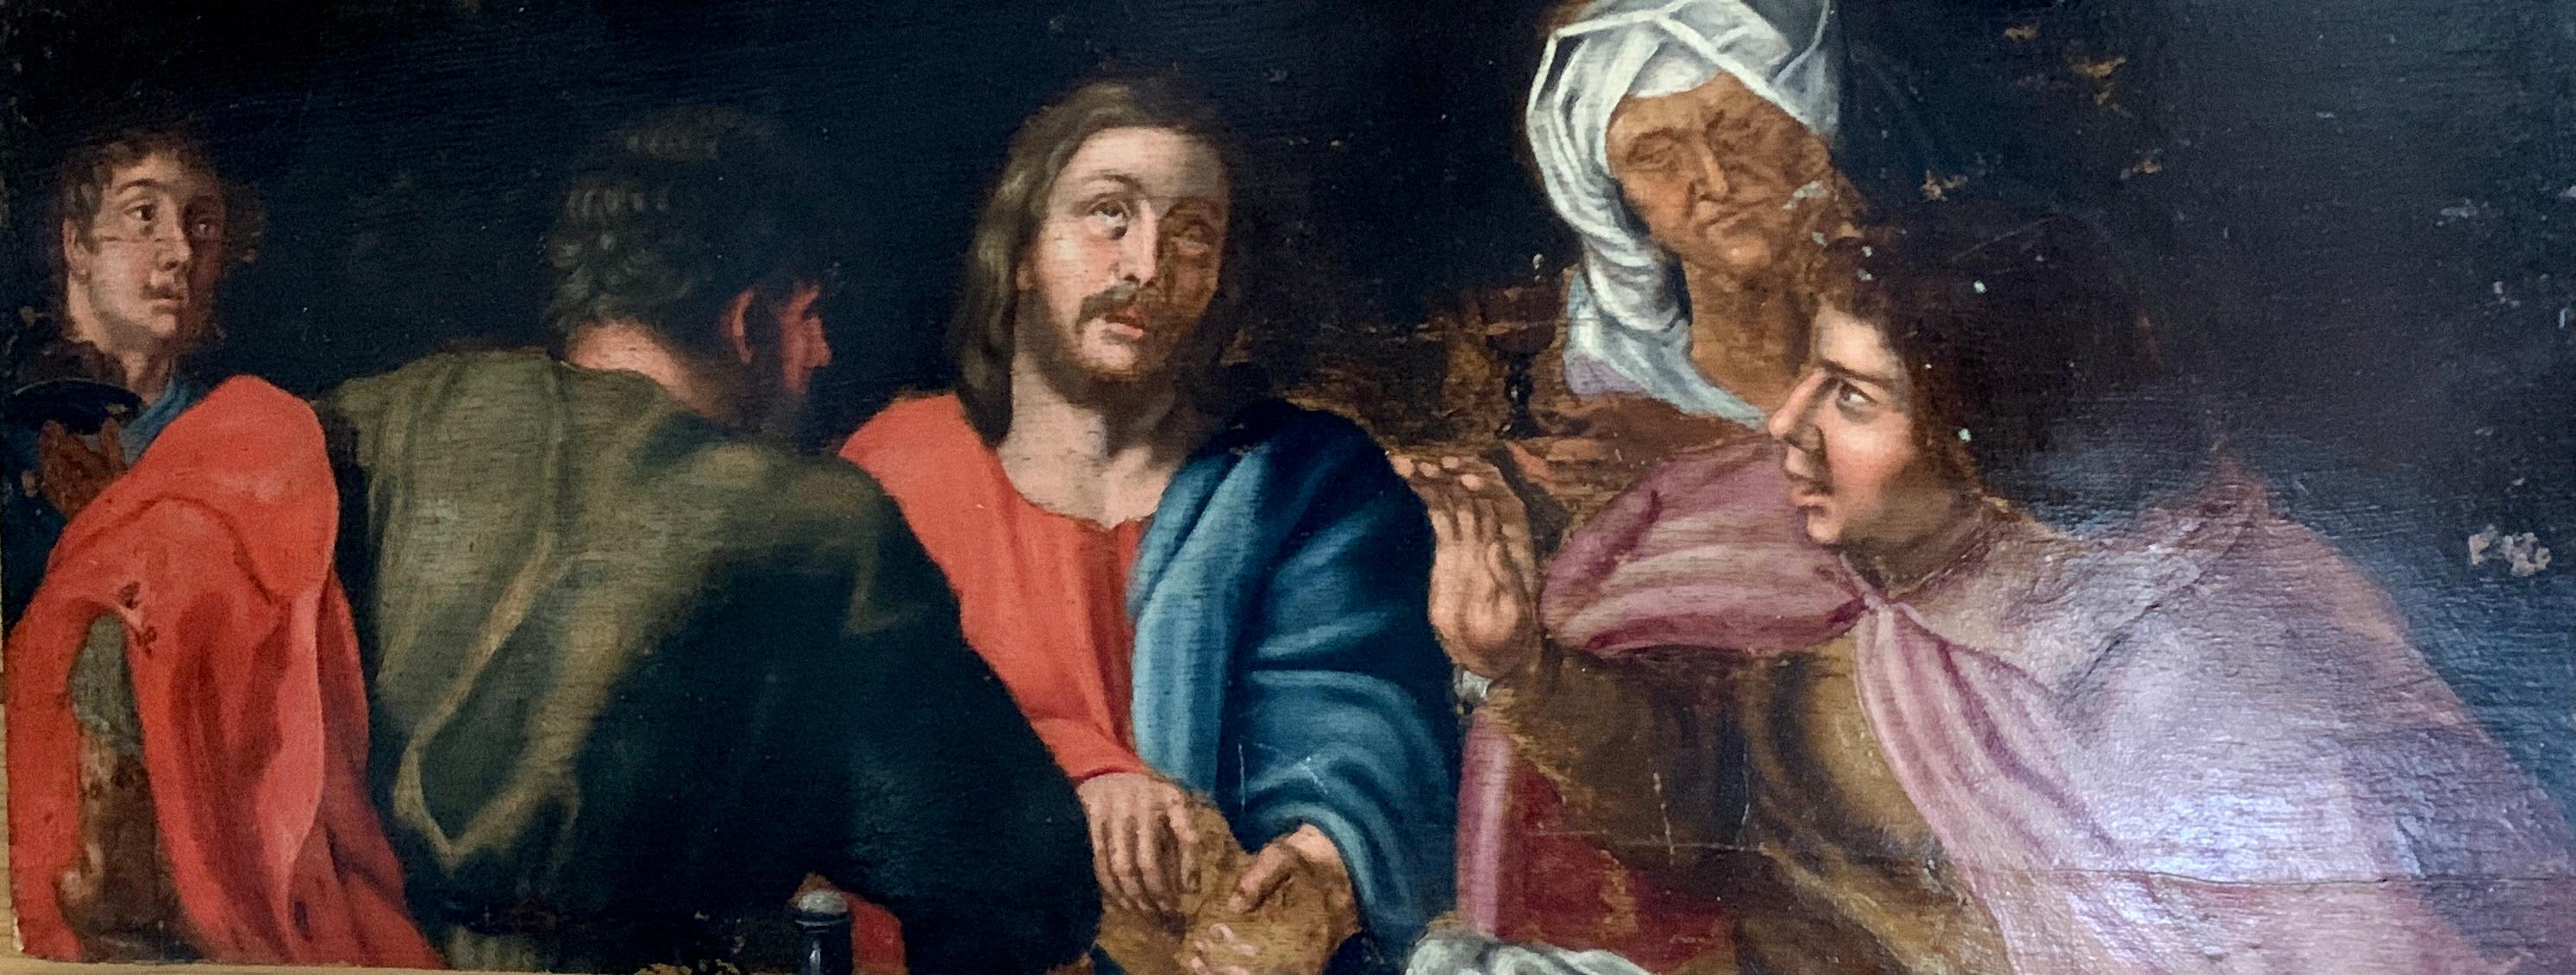 Unknown Figurative Painting - 17th century European oil, Christ and his disciples seated around a table.